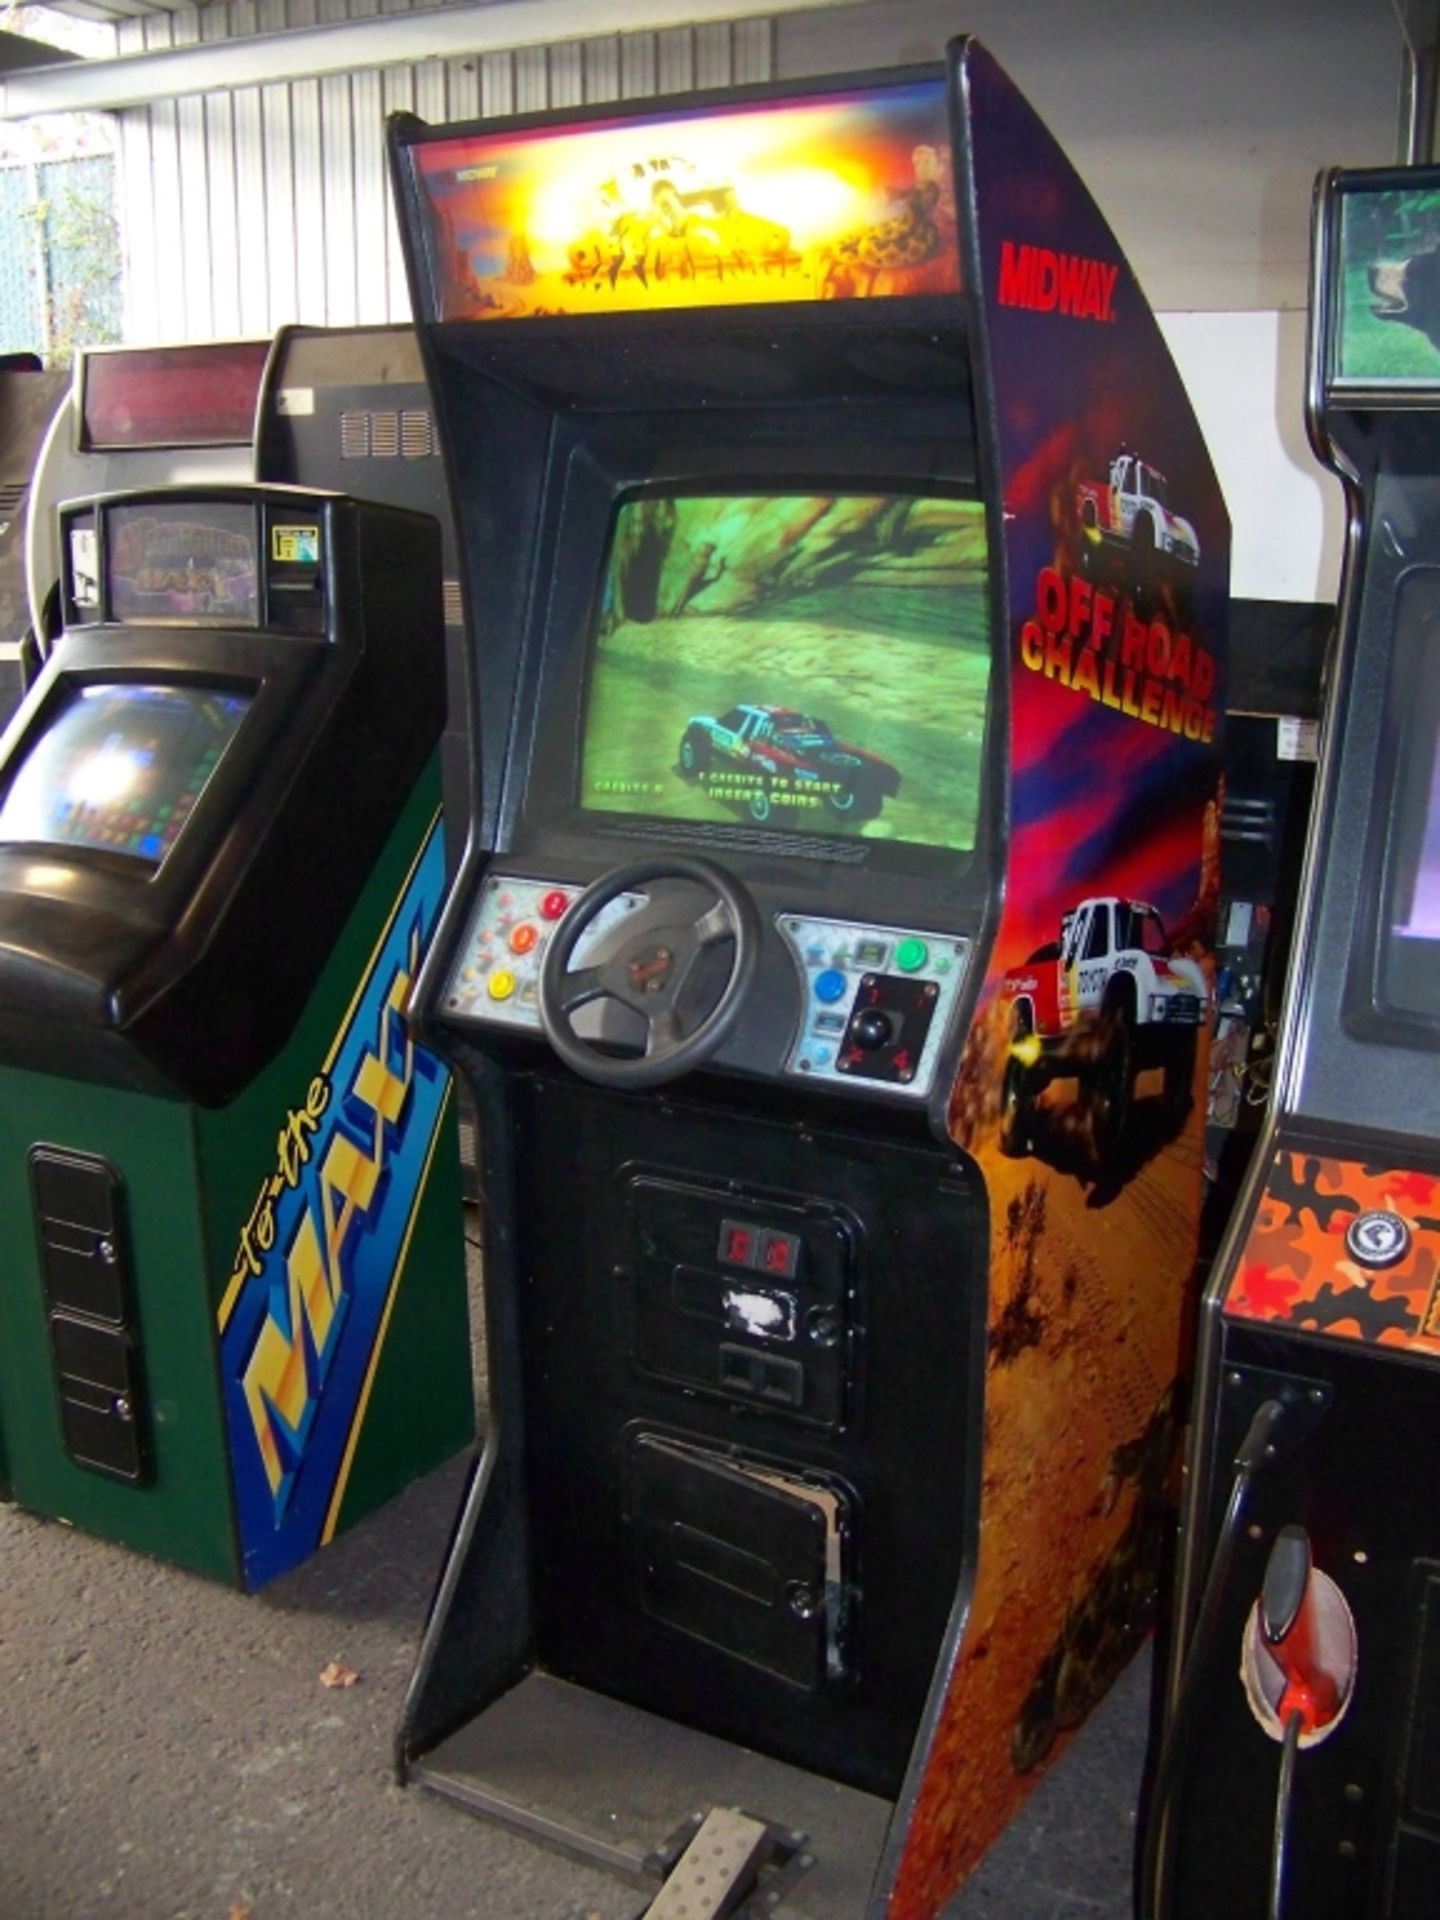 OFFROAD CHALLENGE UPRIGHT DRIVER ARCADE GAME - Image 3 of 3